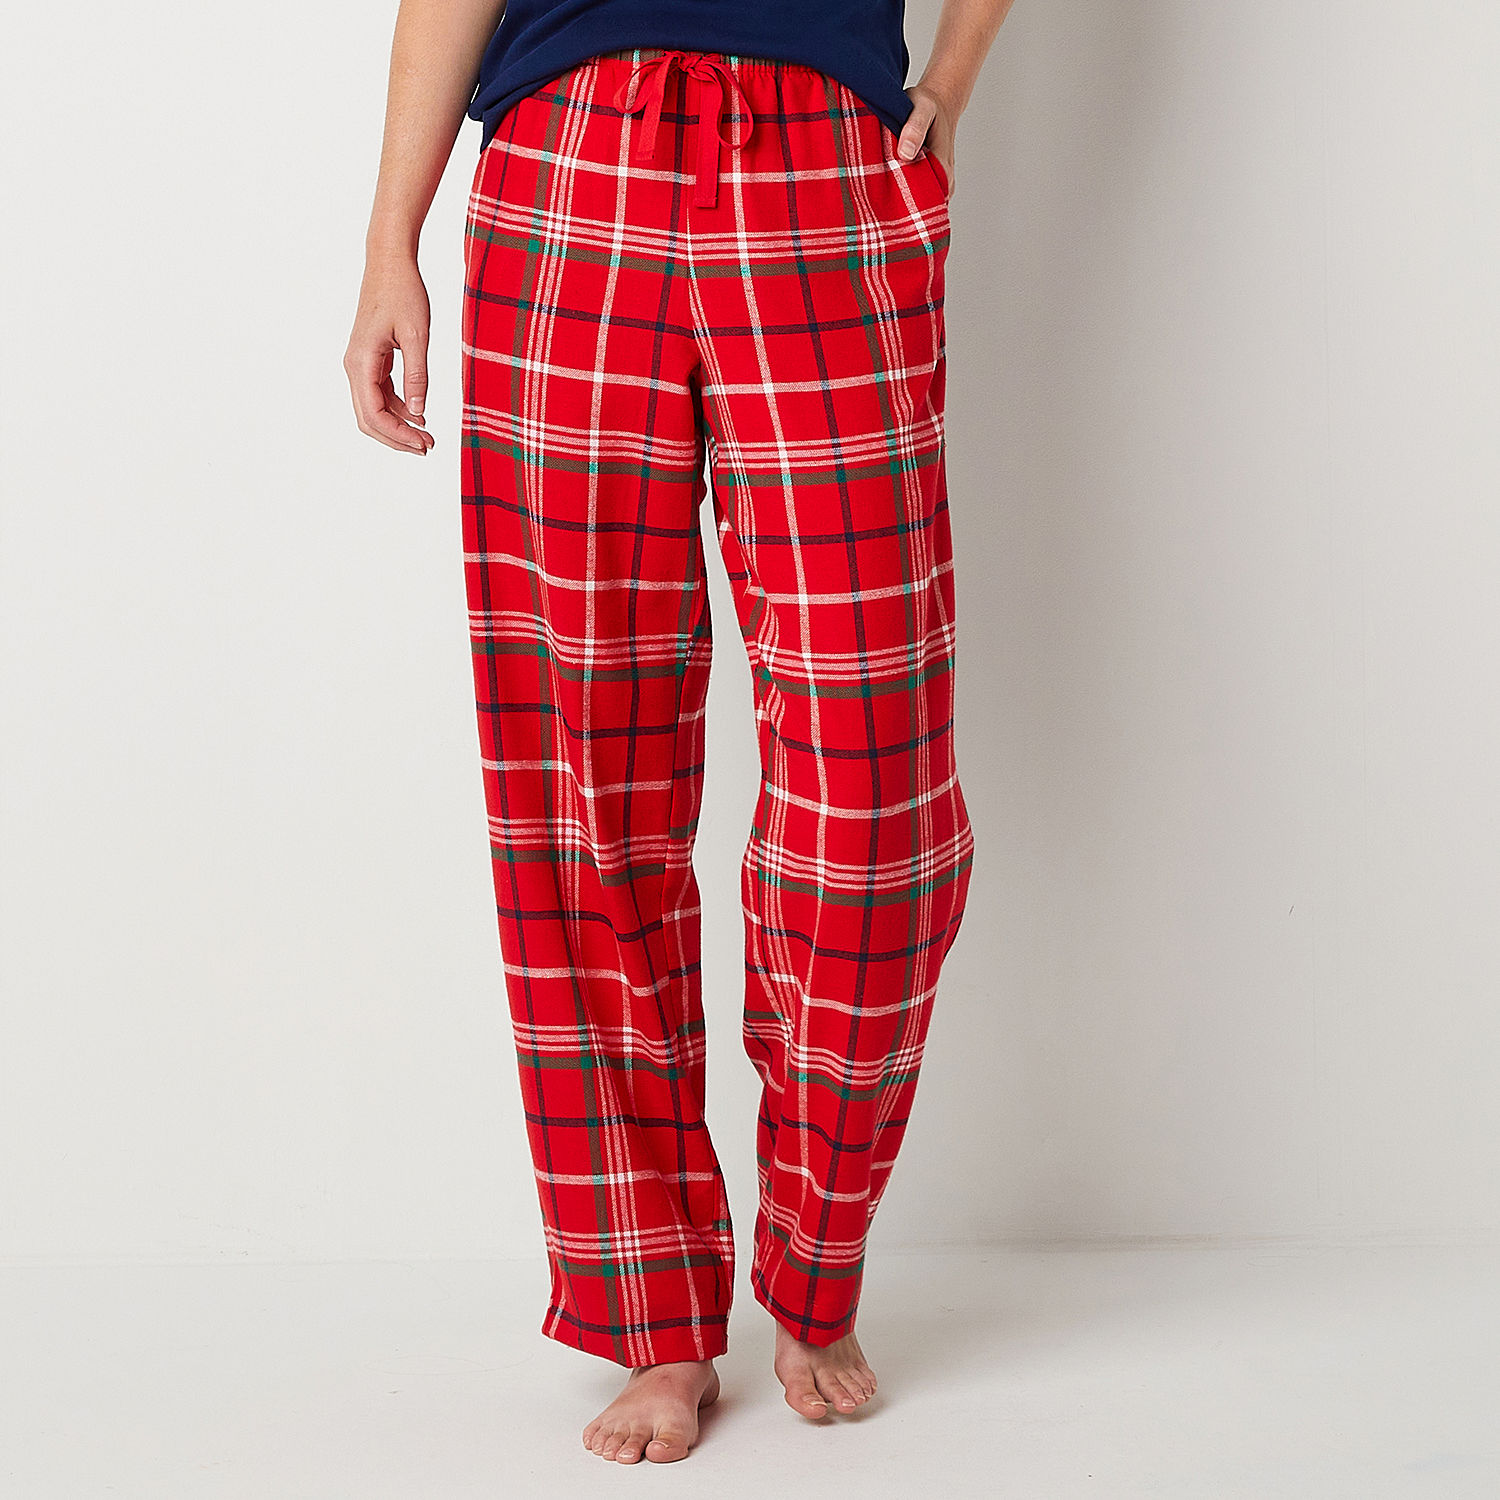 Sleep Chic Womens Pajama Flannel Pants - JCPenney